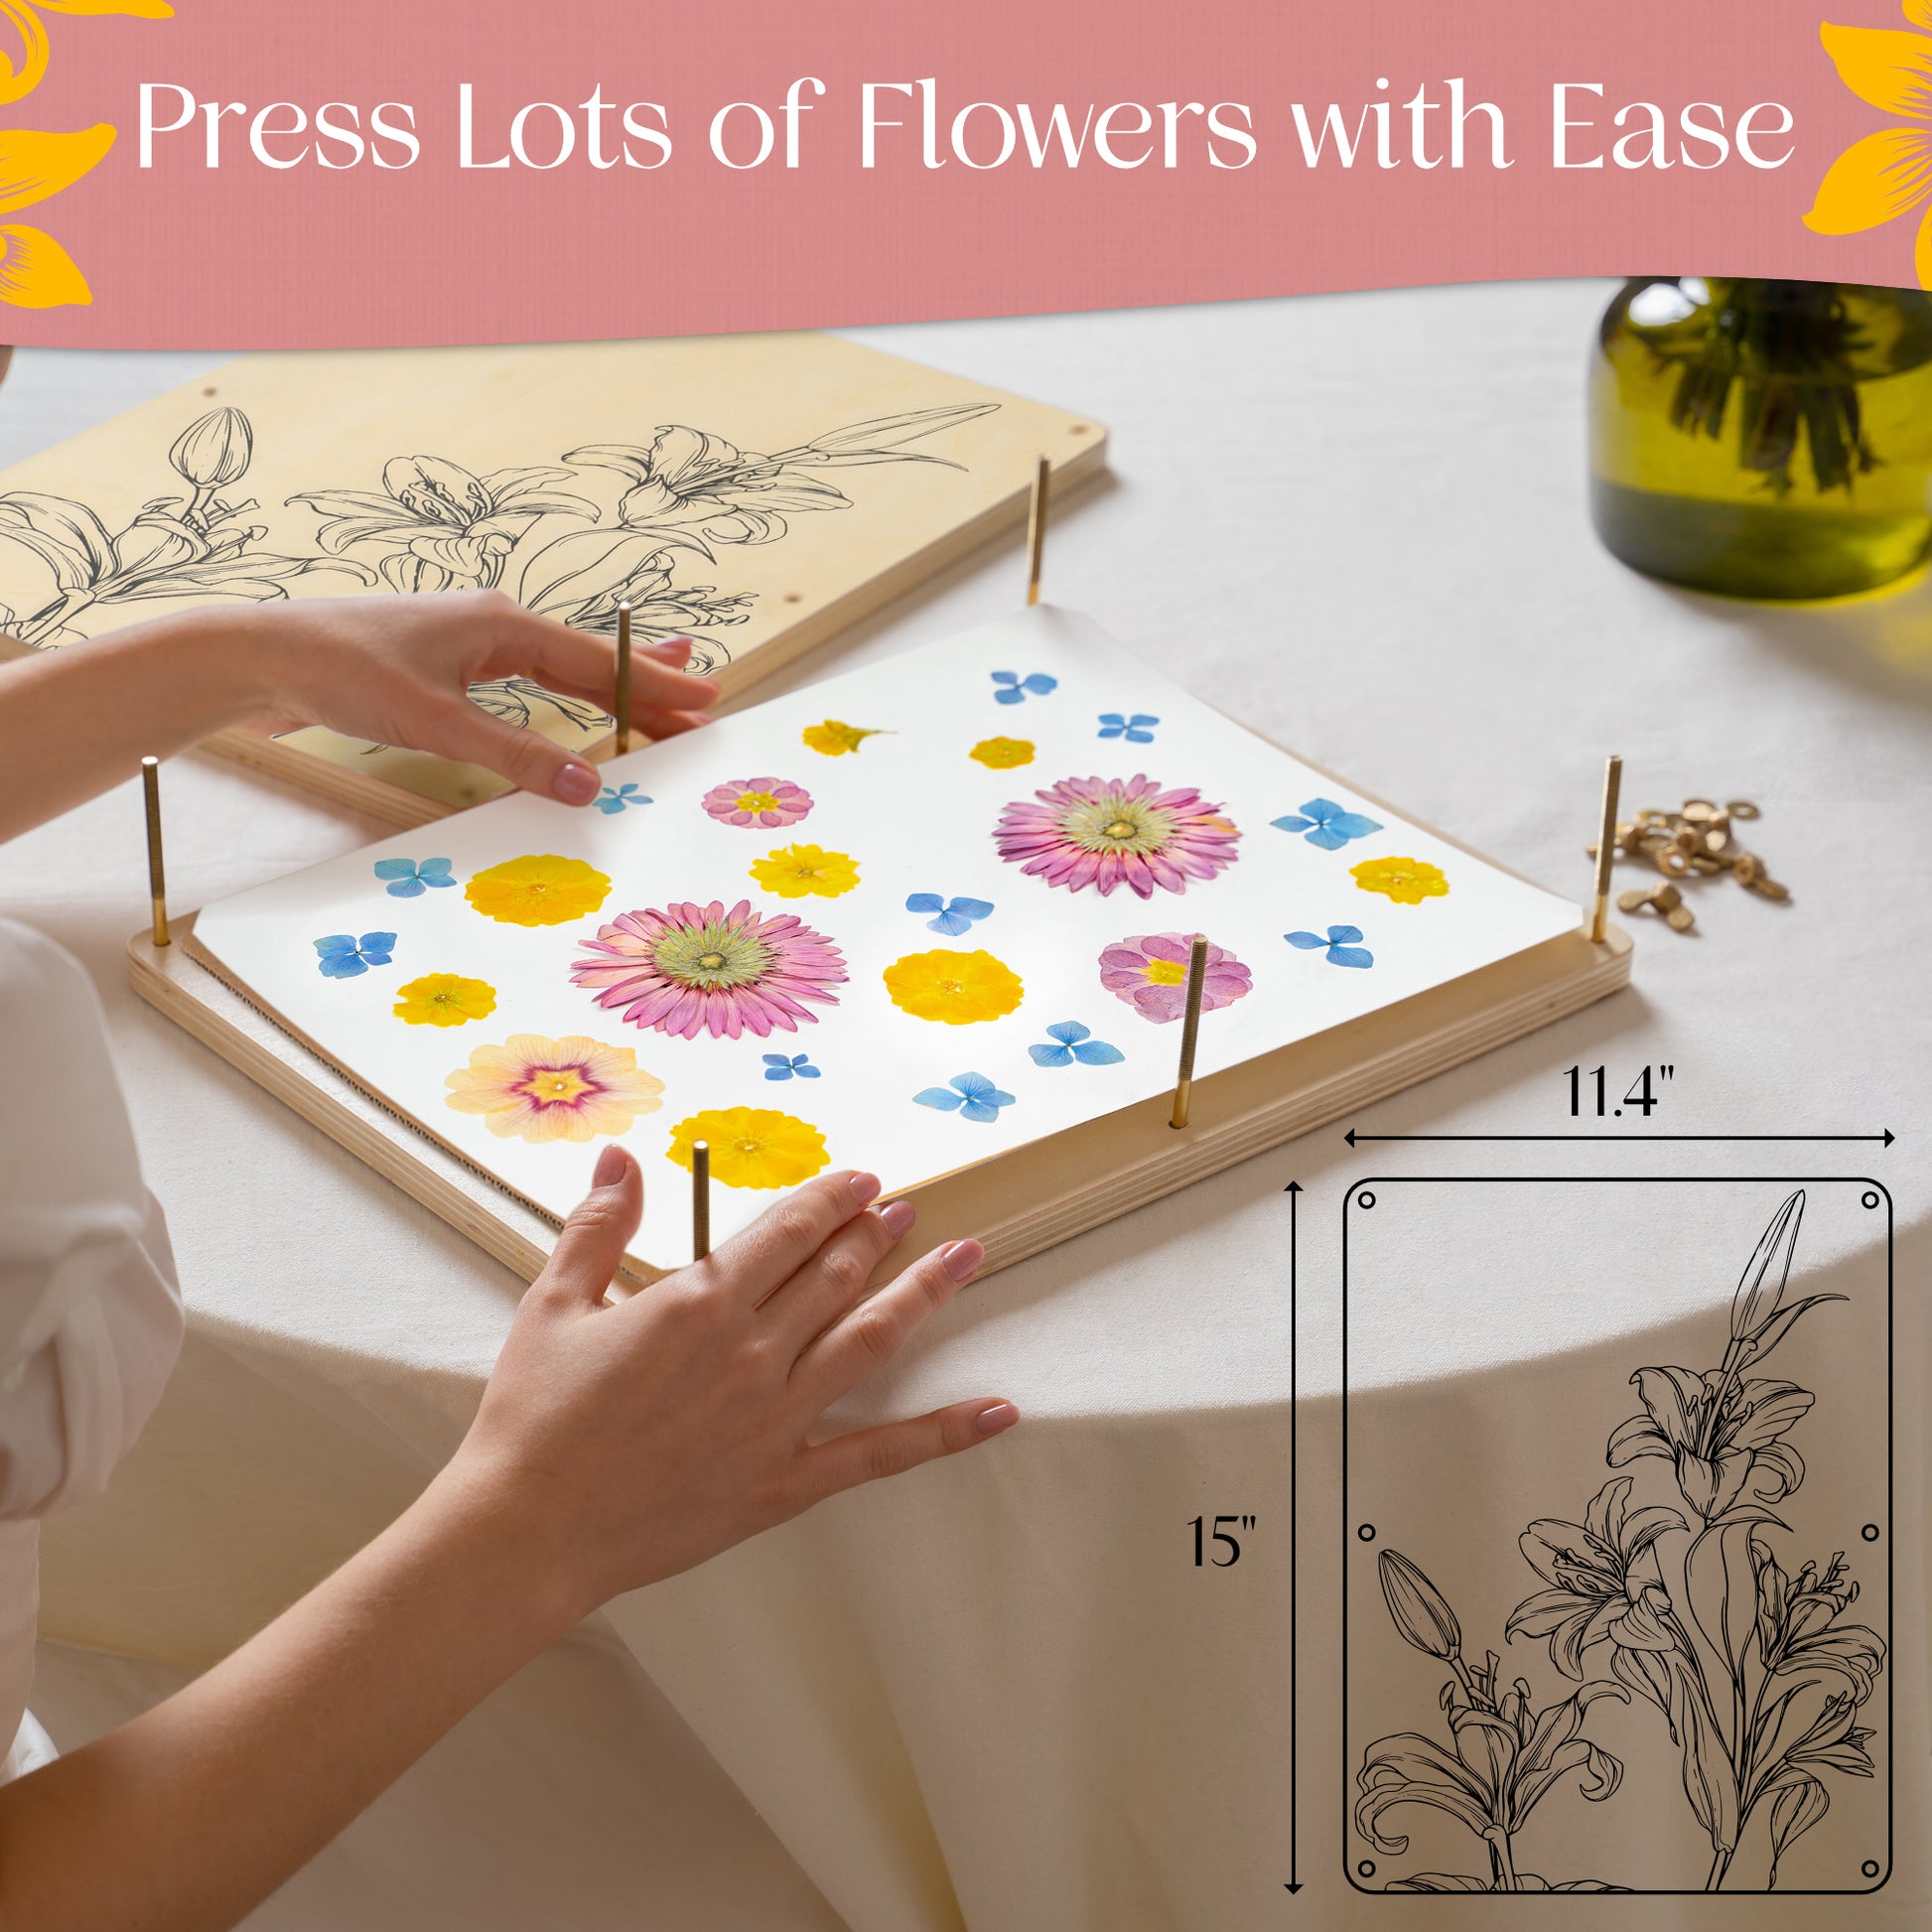 Berstuk Extra Large Flower Press Kit for Adults - This Big Flower Preservation Kit Measures 15 x 11.4 - Our Plant Press & Leaf Press Is A Great